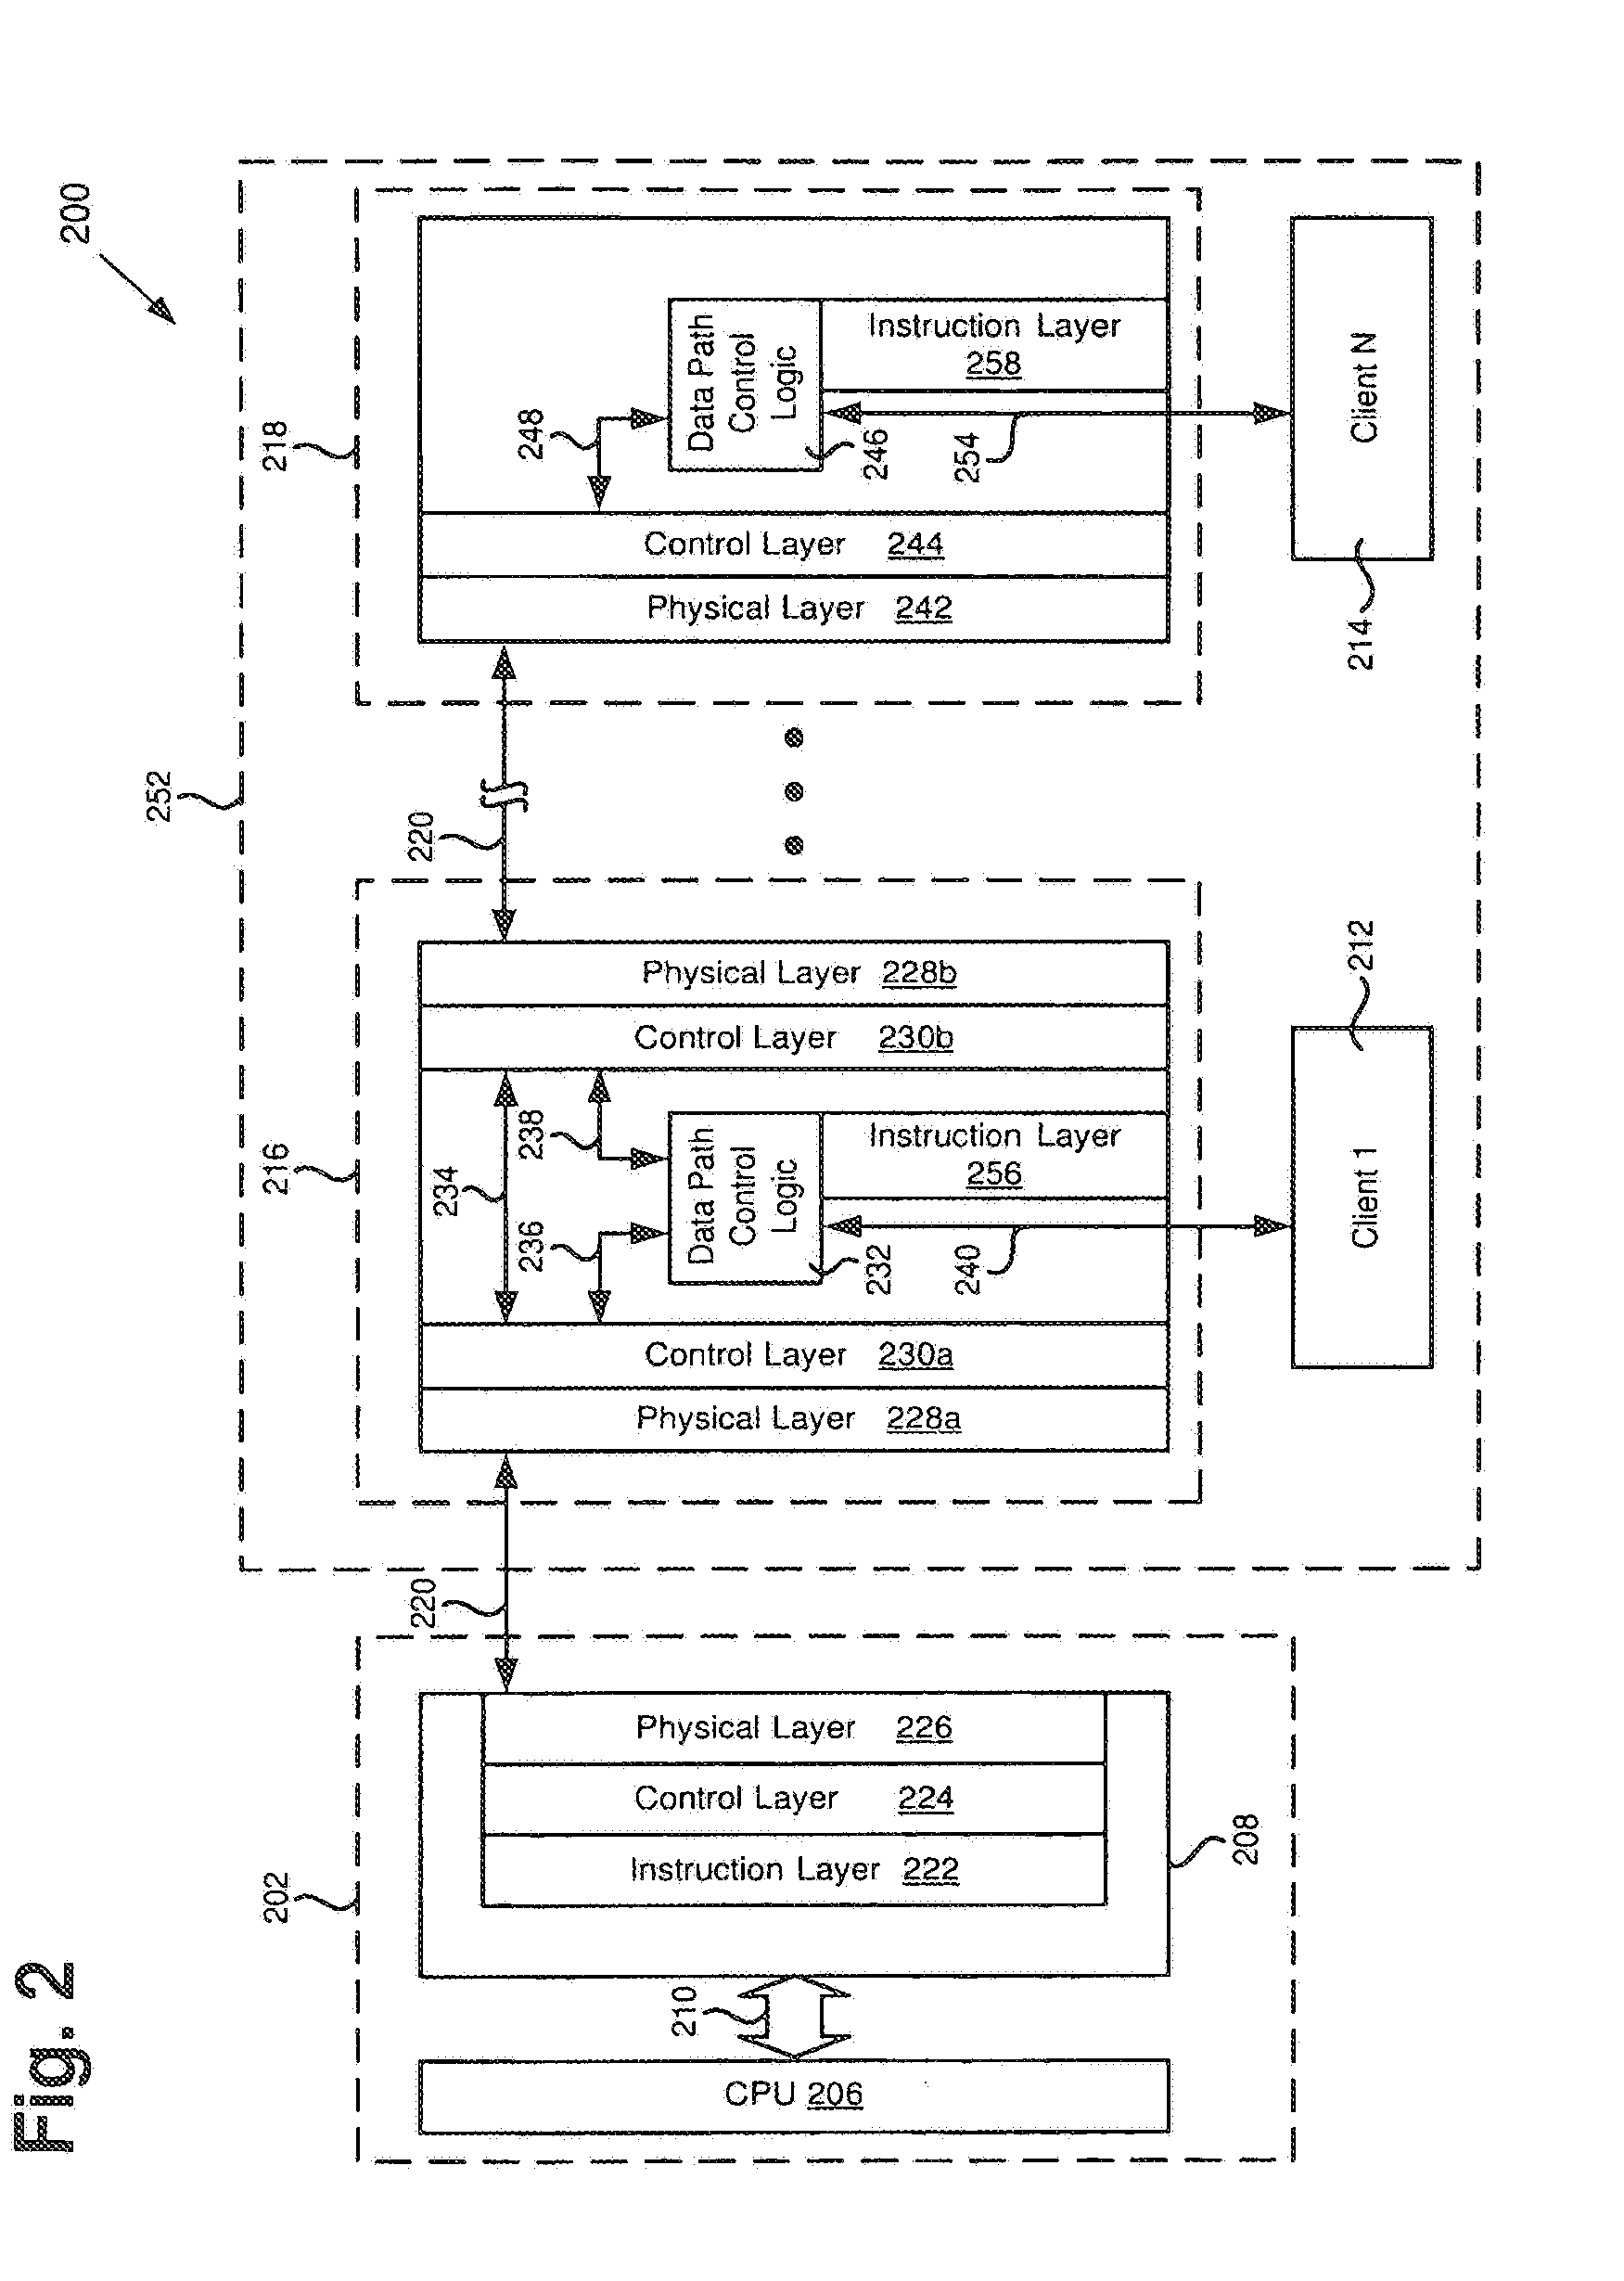 Host/client system having a scalable serial bus interface